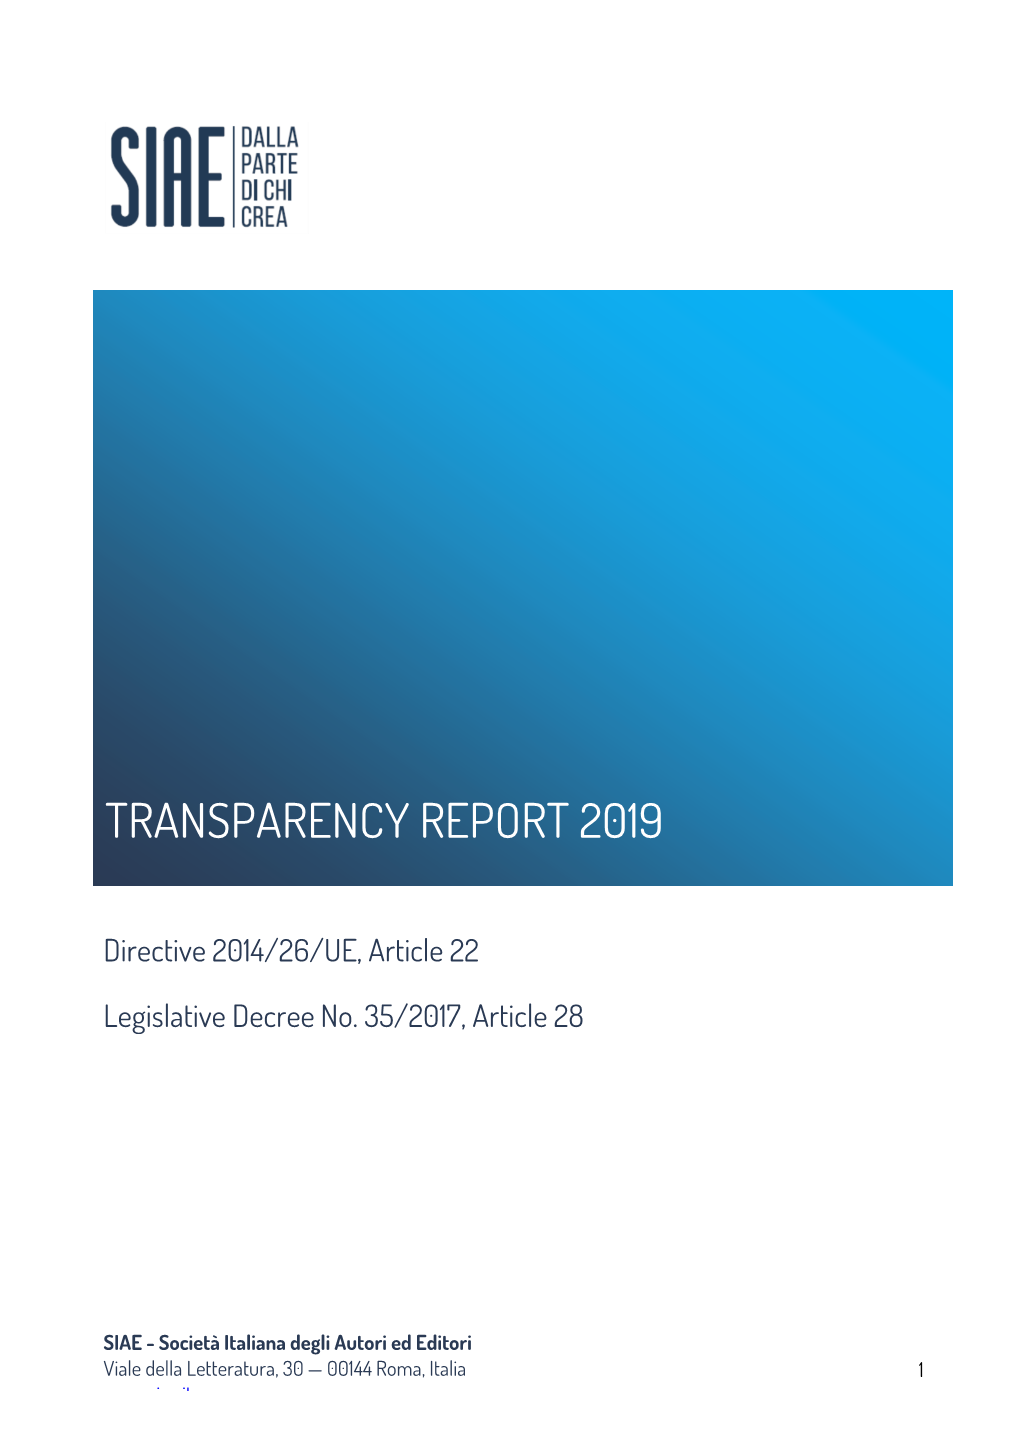 Transparency Report 2019